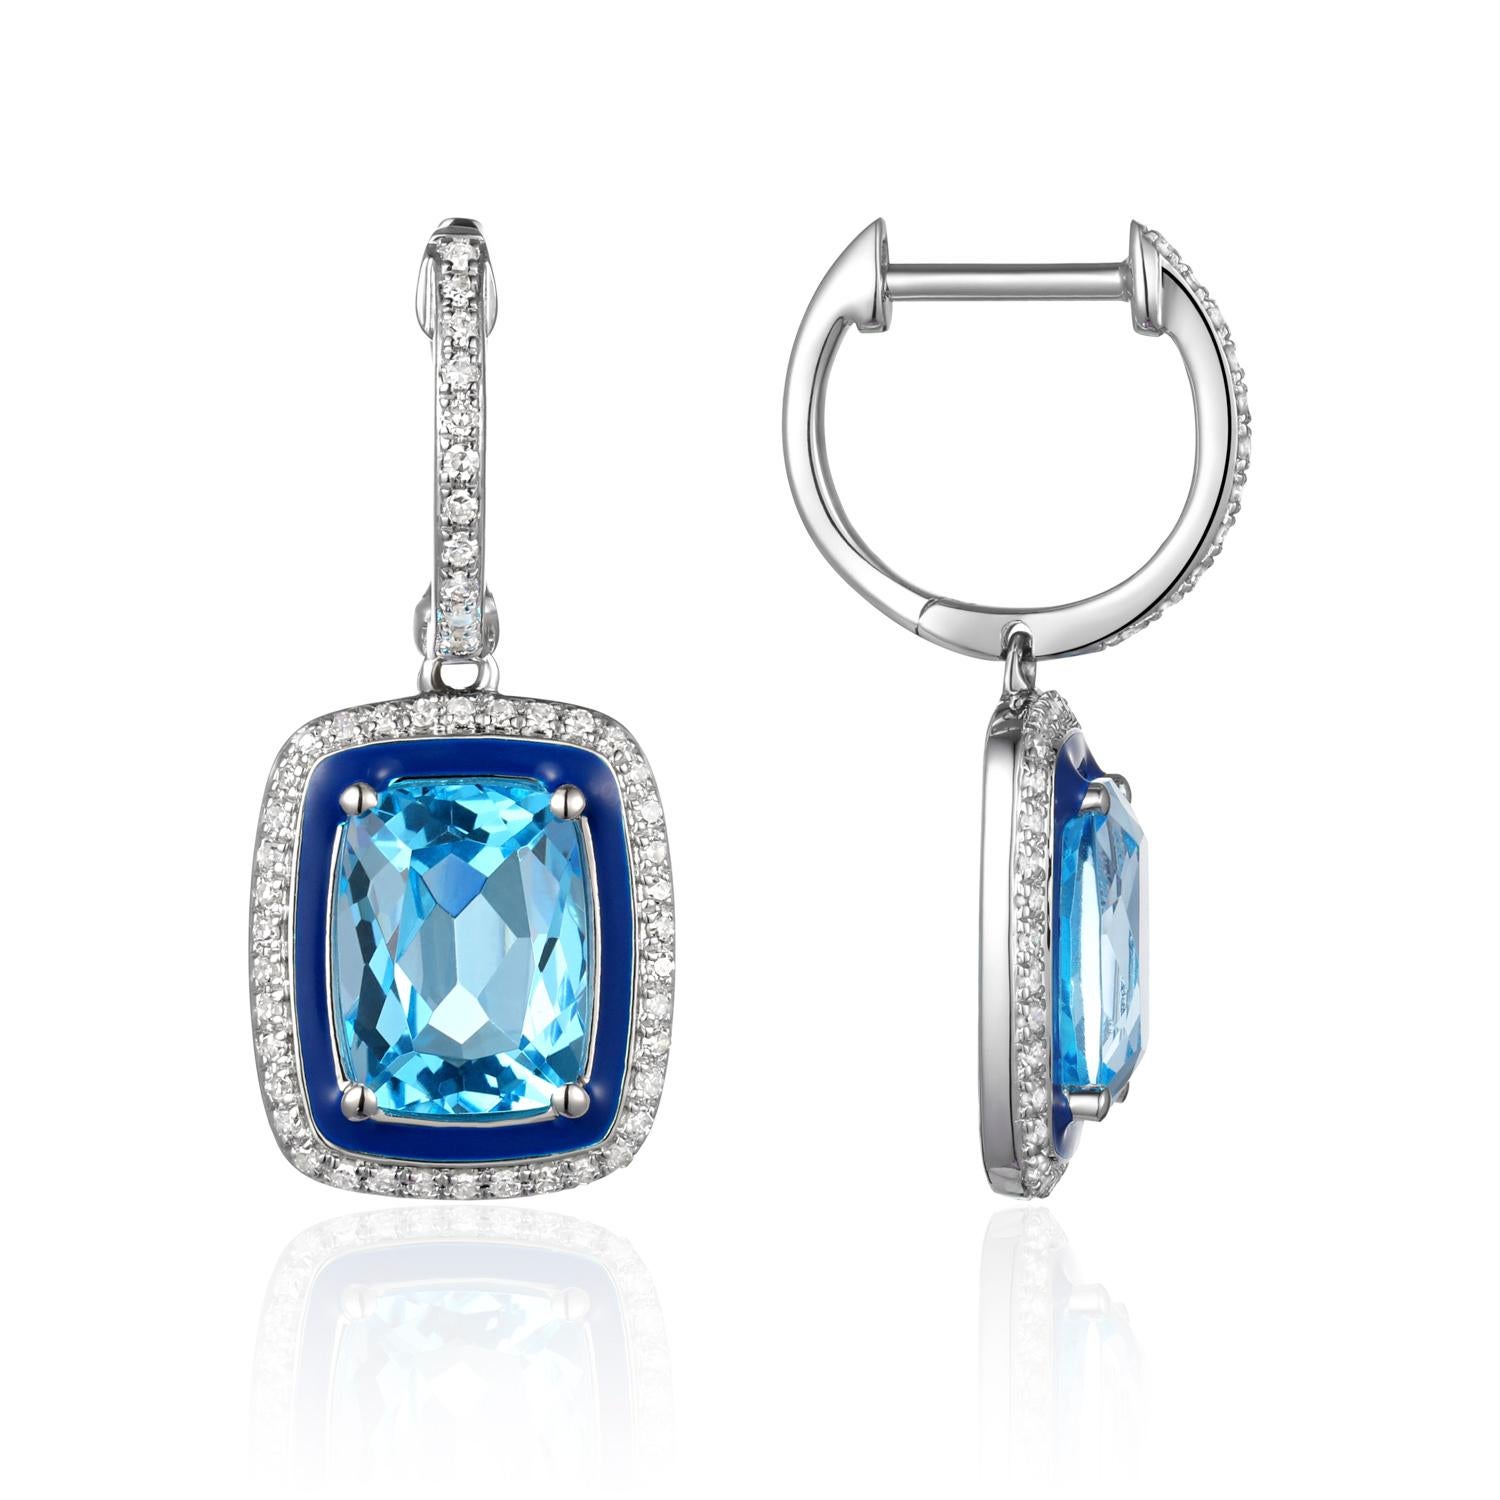 14K White Gold Diamond Enamel Earrings featuring 0.22 Carats of Diamonds and 4.17 Carats of Blue Topaz

Underline your look with this sharp 14K White gold shape Diamond Earrings. High quality Diamonds. This Earrings will underline your exquisite